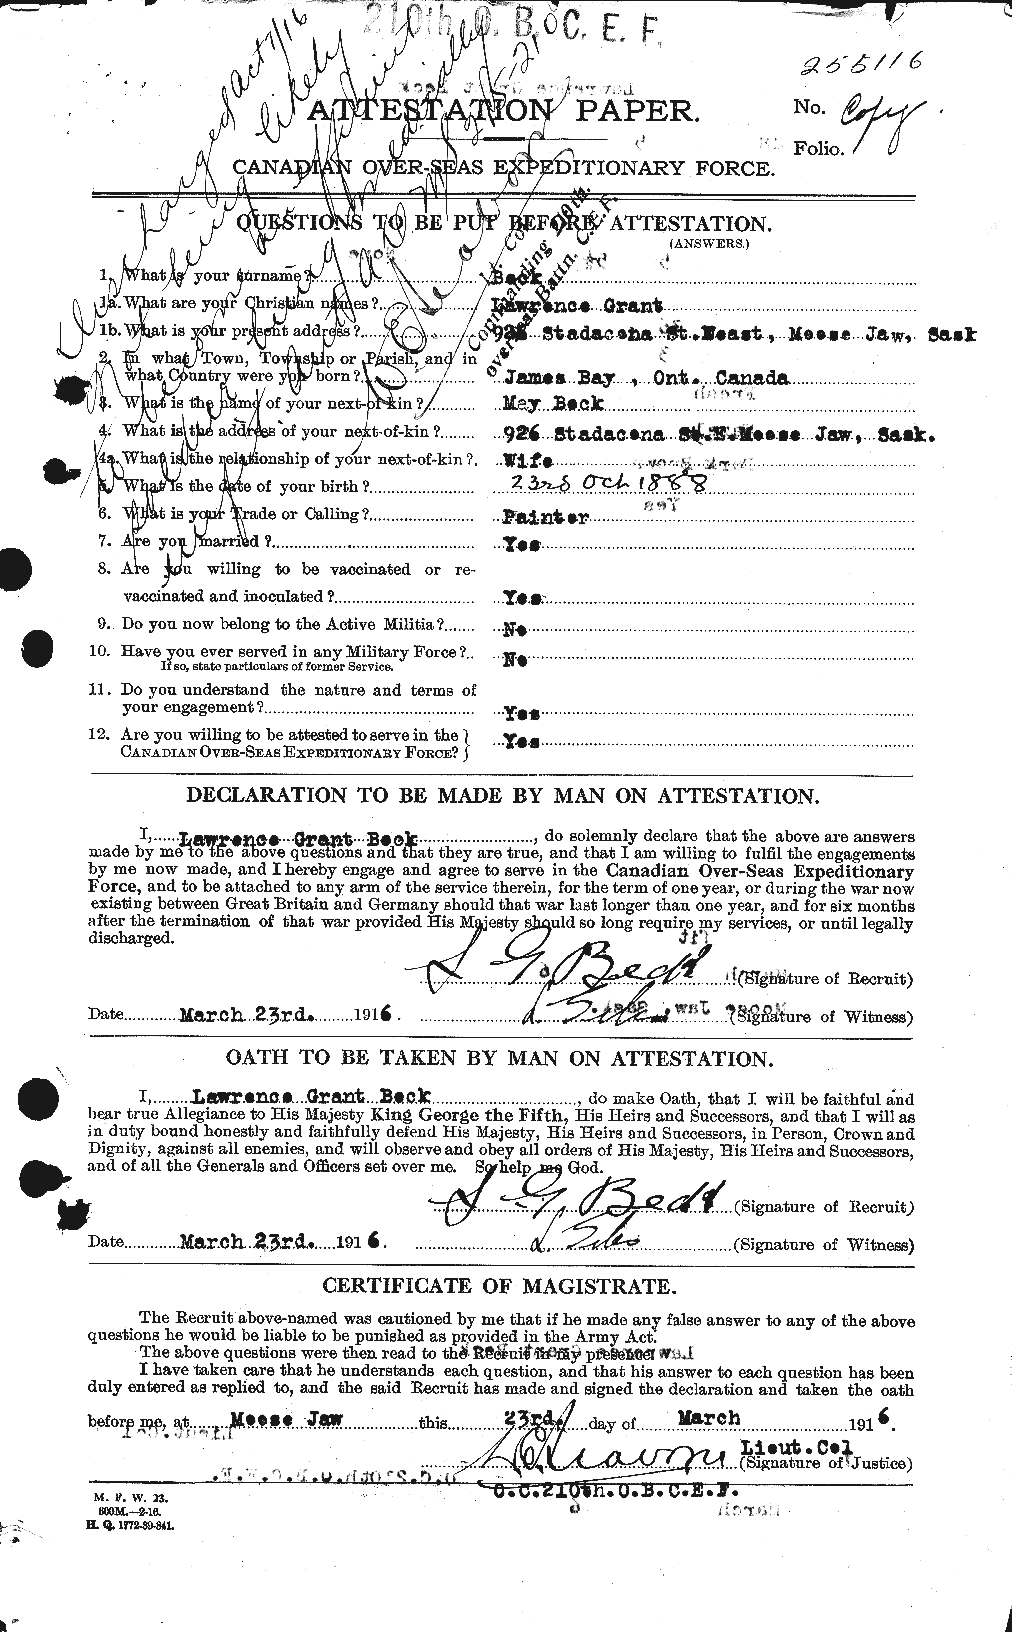 Personnel Records of the First World War - CEF 232188a